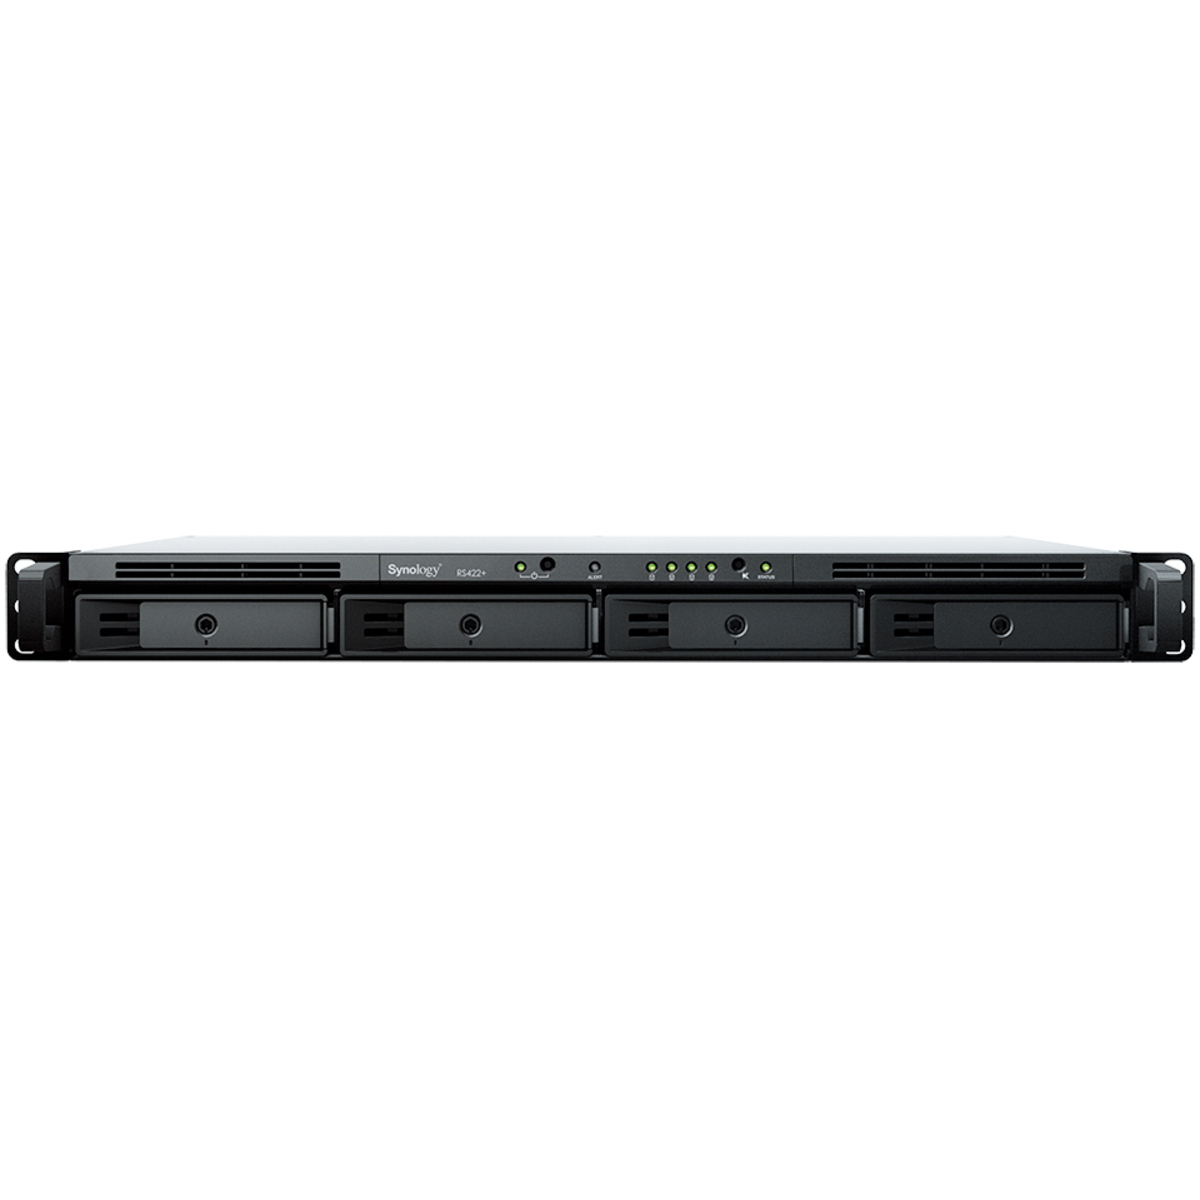 Synology RackStation RS422+ 66tb 4-Bay RackMount Personal / Basic Home / Small Office NAS - Network Attached Storage Device 3x22tb Seagate IronWolf Pro ST22000NT001 3.5 7200rpm SATA 6Gb/s HDD NAS Class Drives Installed - Burn-In Tested RackStation RS422+